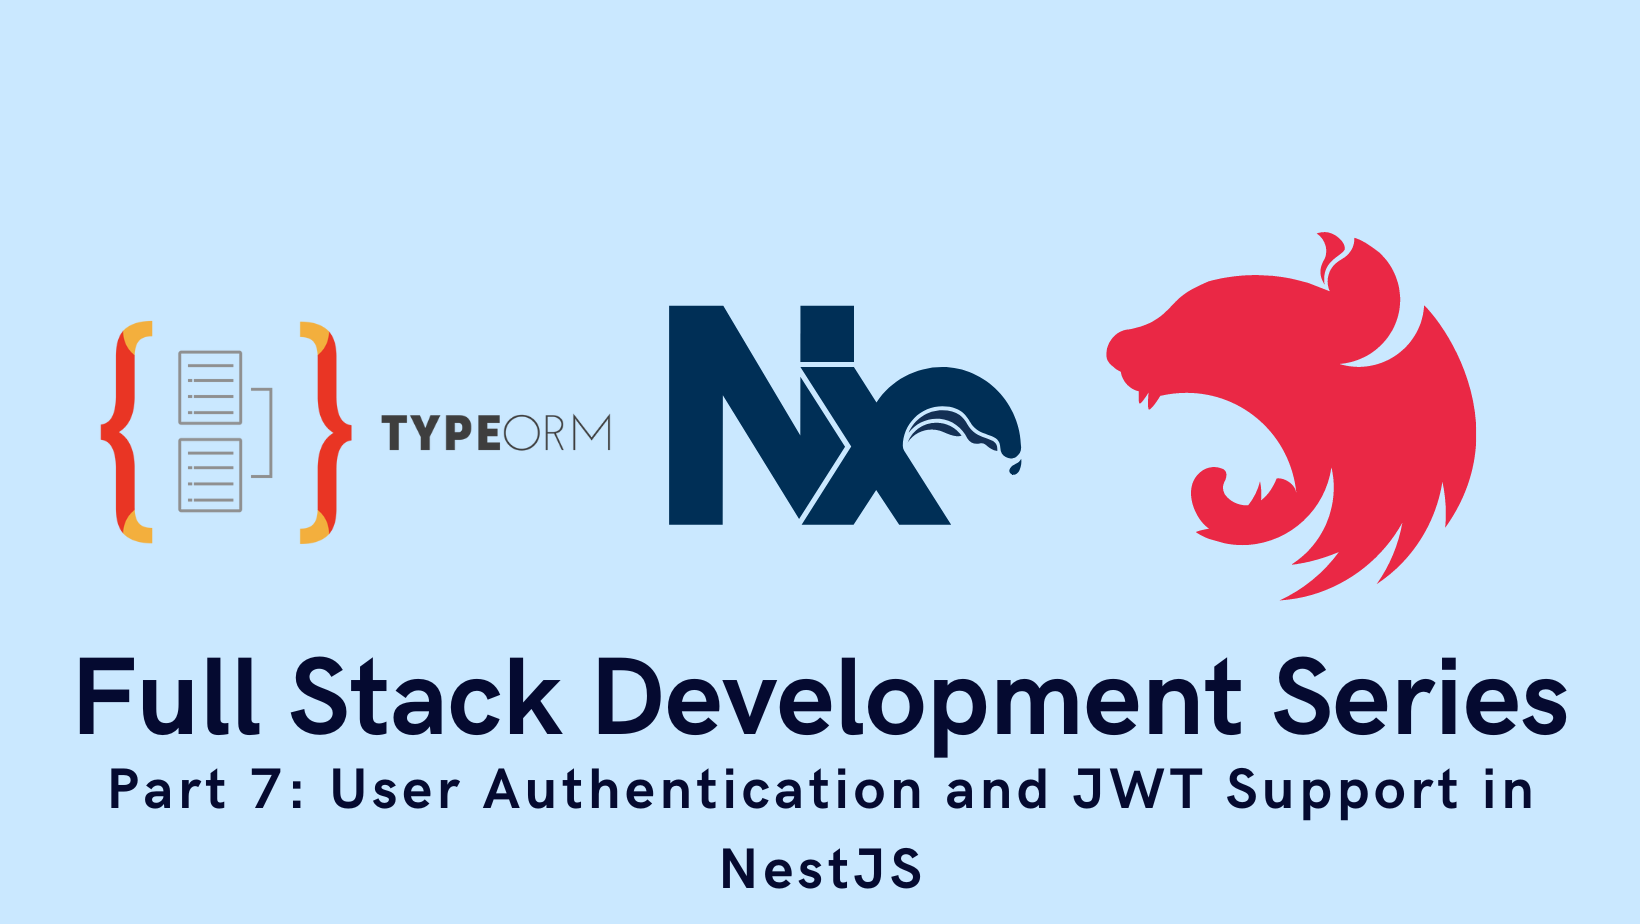 Full Stack Development Series Part 8: User Authentication and JWT Support in NestJS